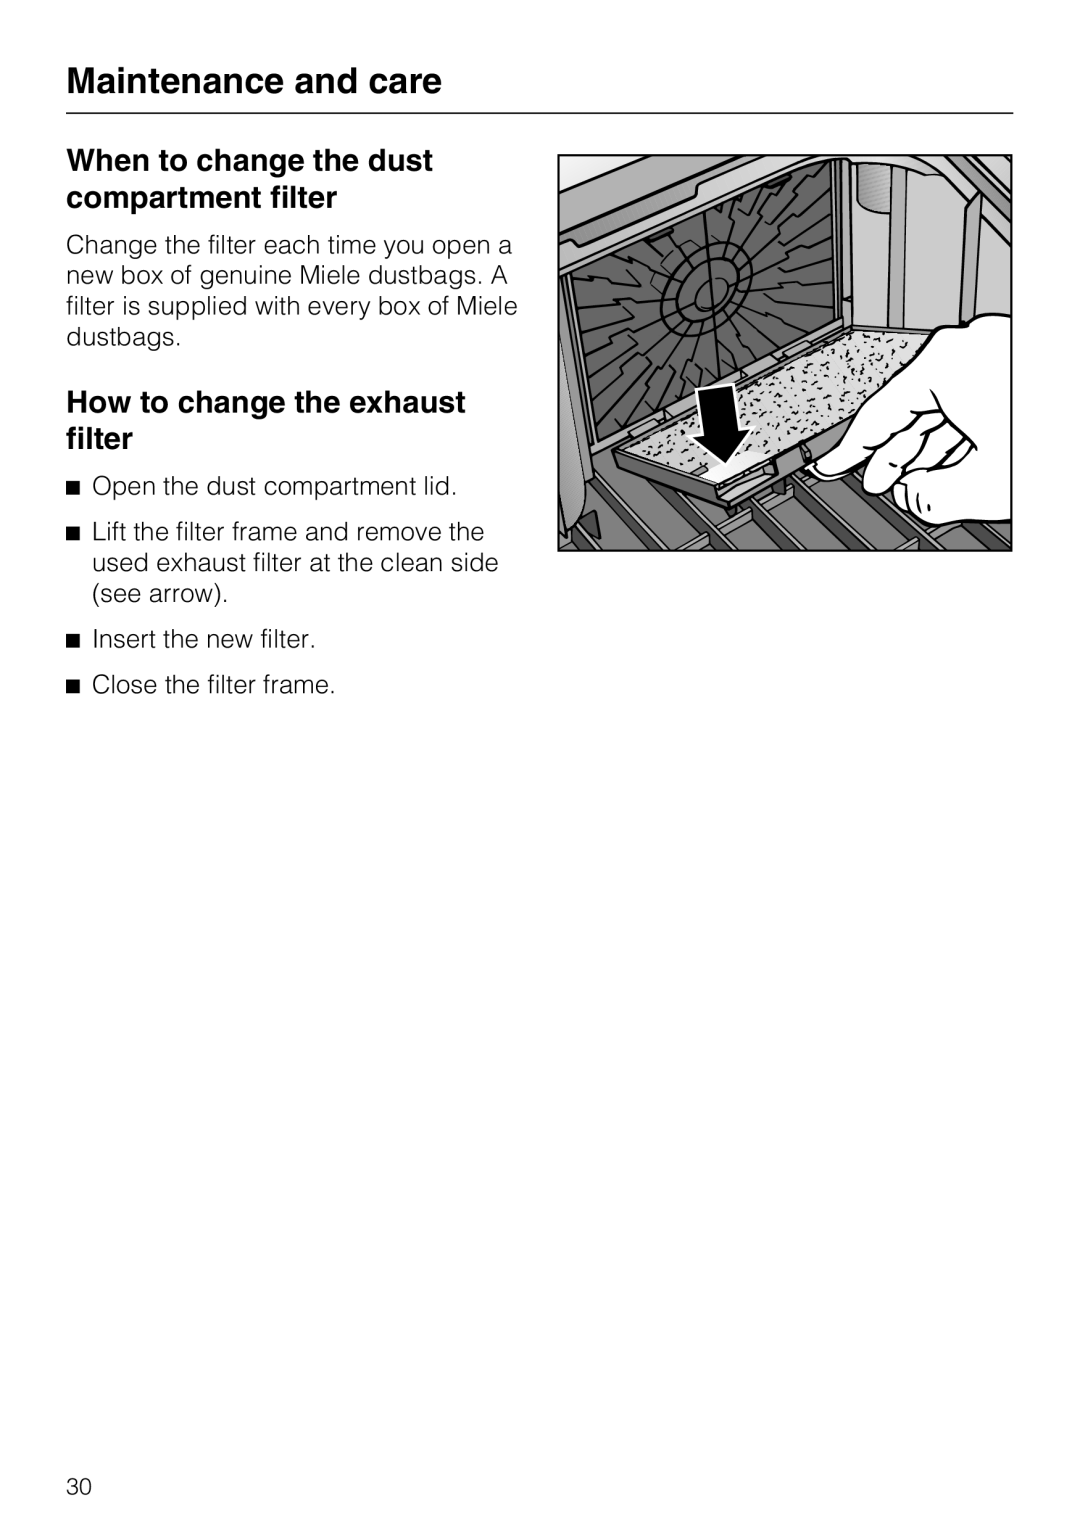 Miele S 5001 manual When to change the dust compartment filter, How to change the exhaust filter, Maintenance and care 